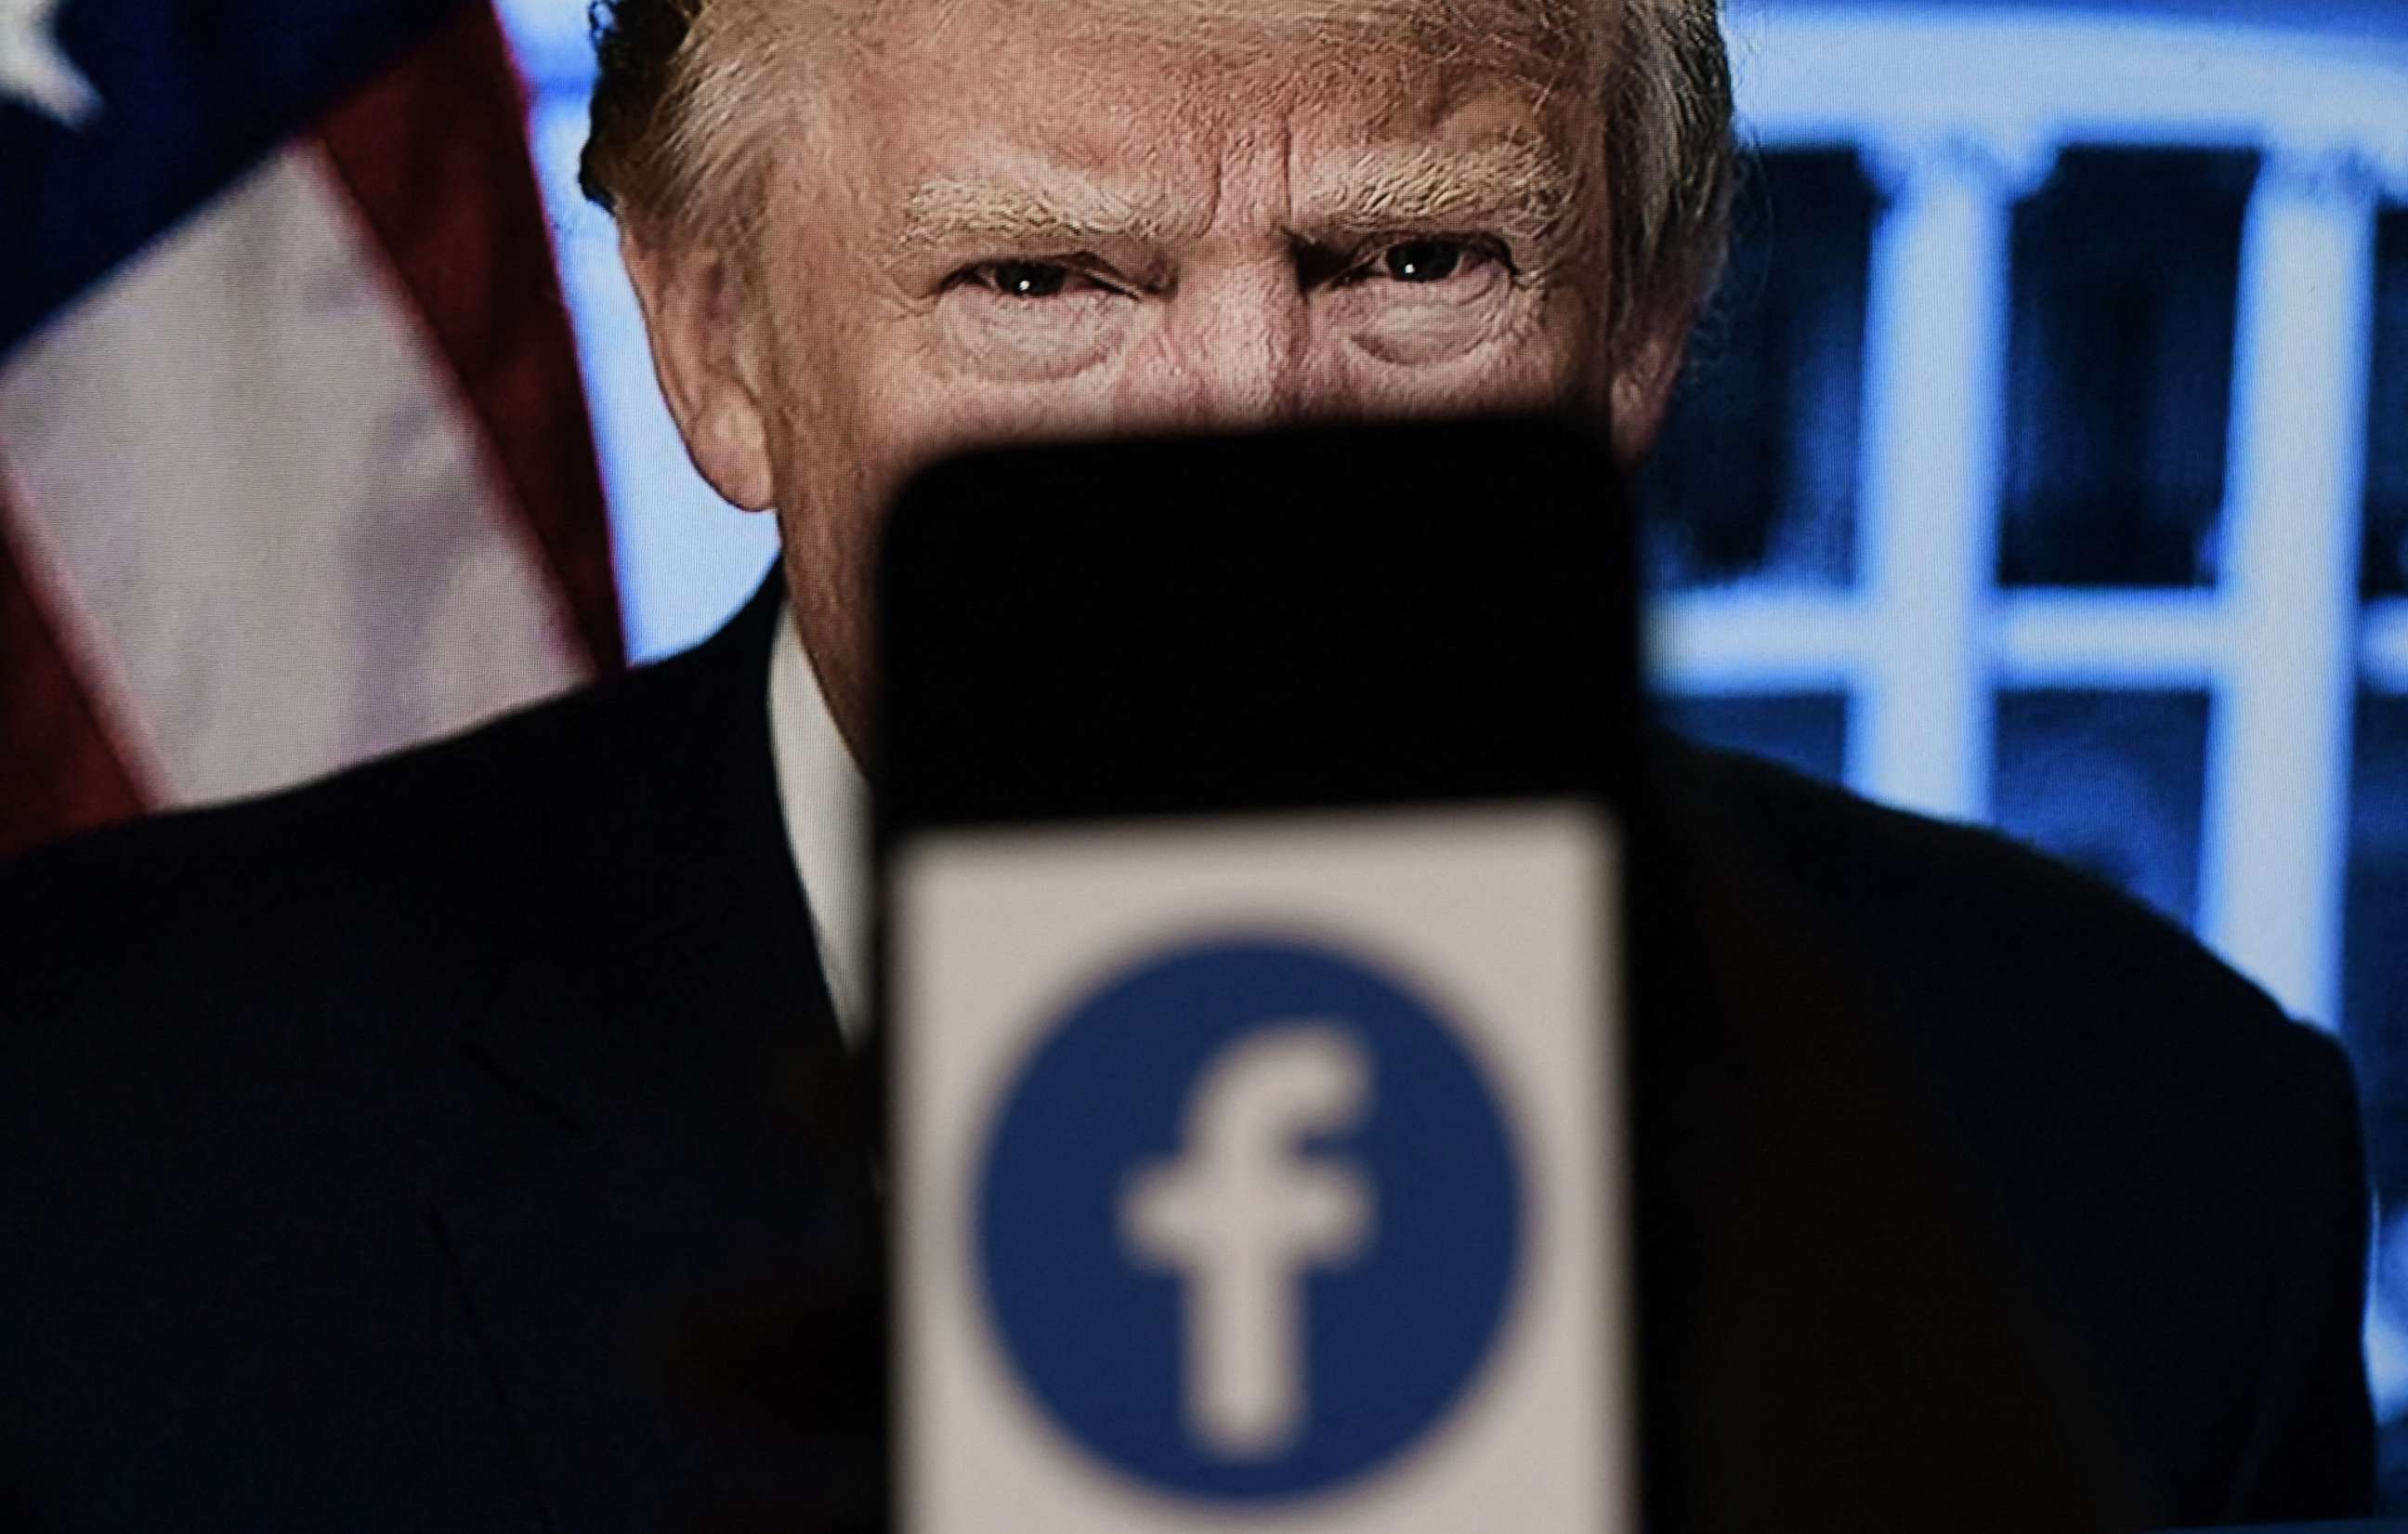 PHOTO: In this photo illustration, a phone screen displays a Facebook logo with the official portrait of former President Donald Trump on the background, on May 4, 2021, in Arlington, Va.